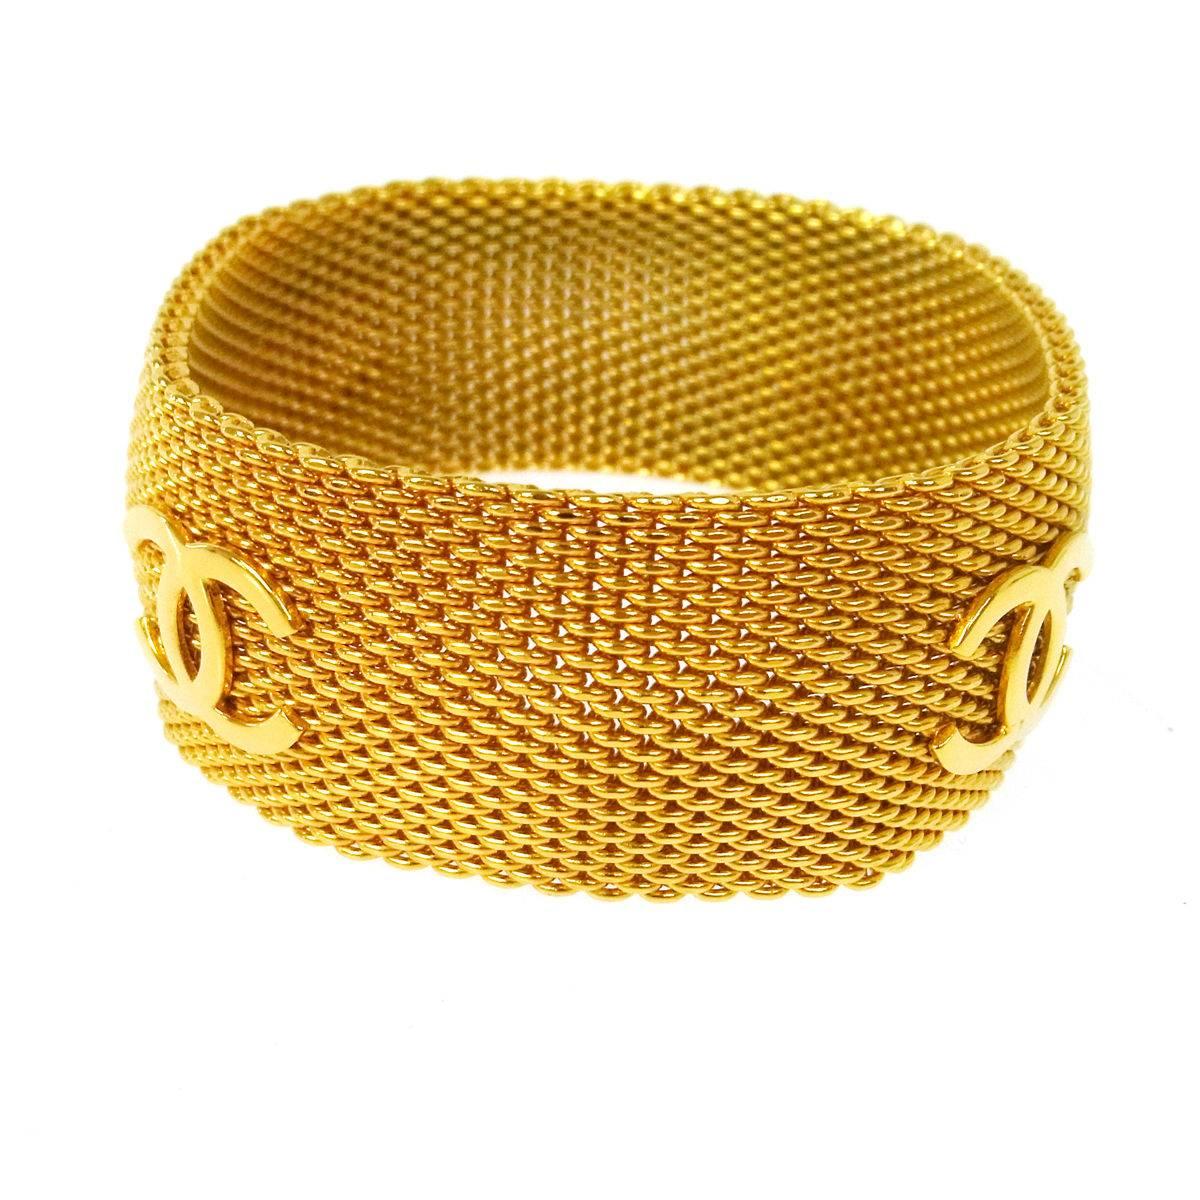 Chanel Gold Charm Mesh Evening Cuff Bracelet  

Metal
Gold tone hardware
Made in France
Width 1